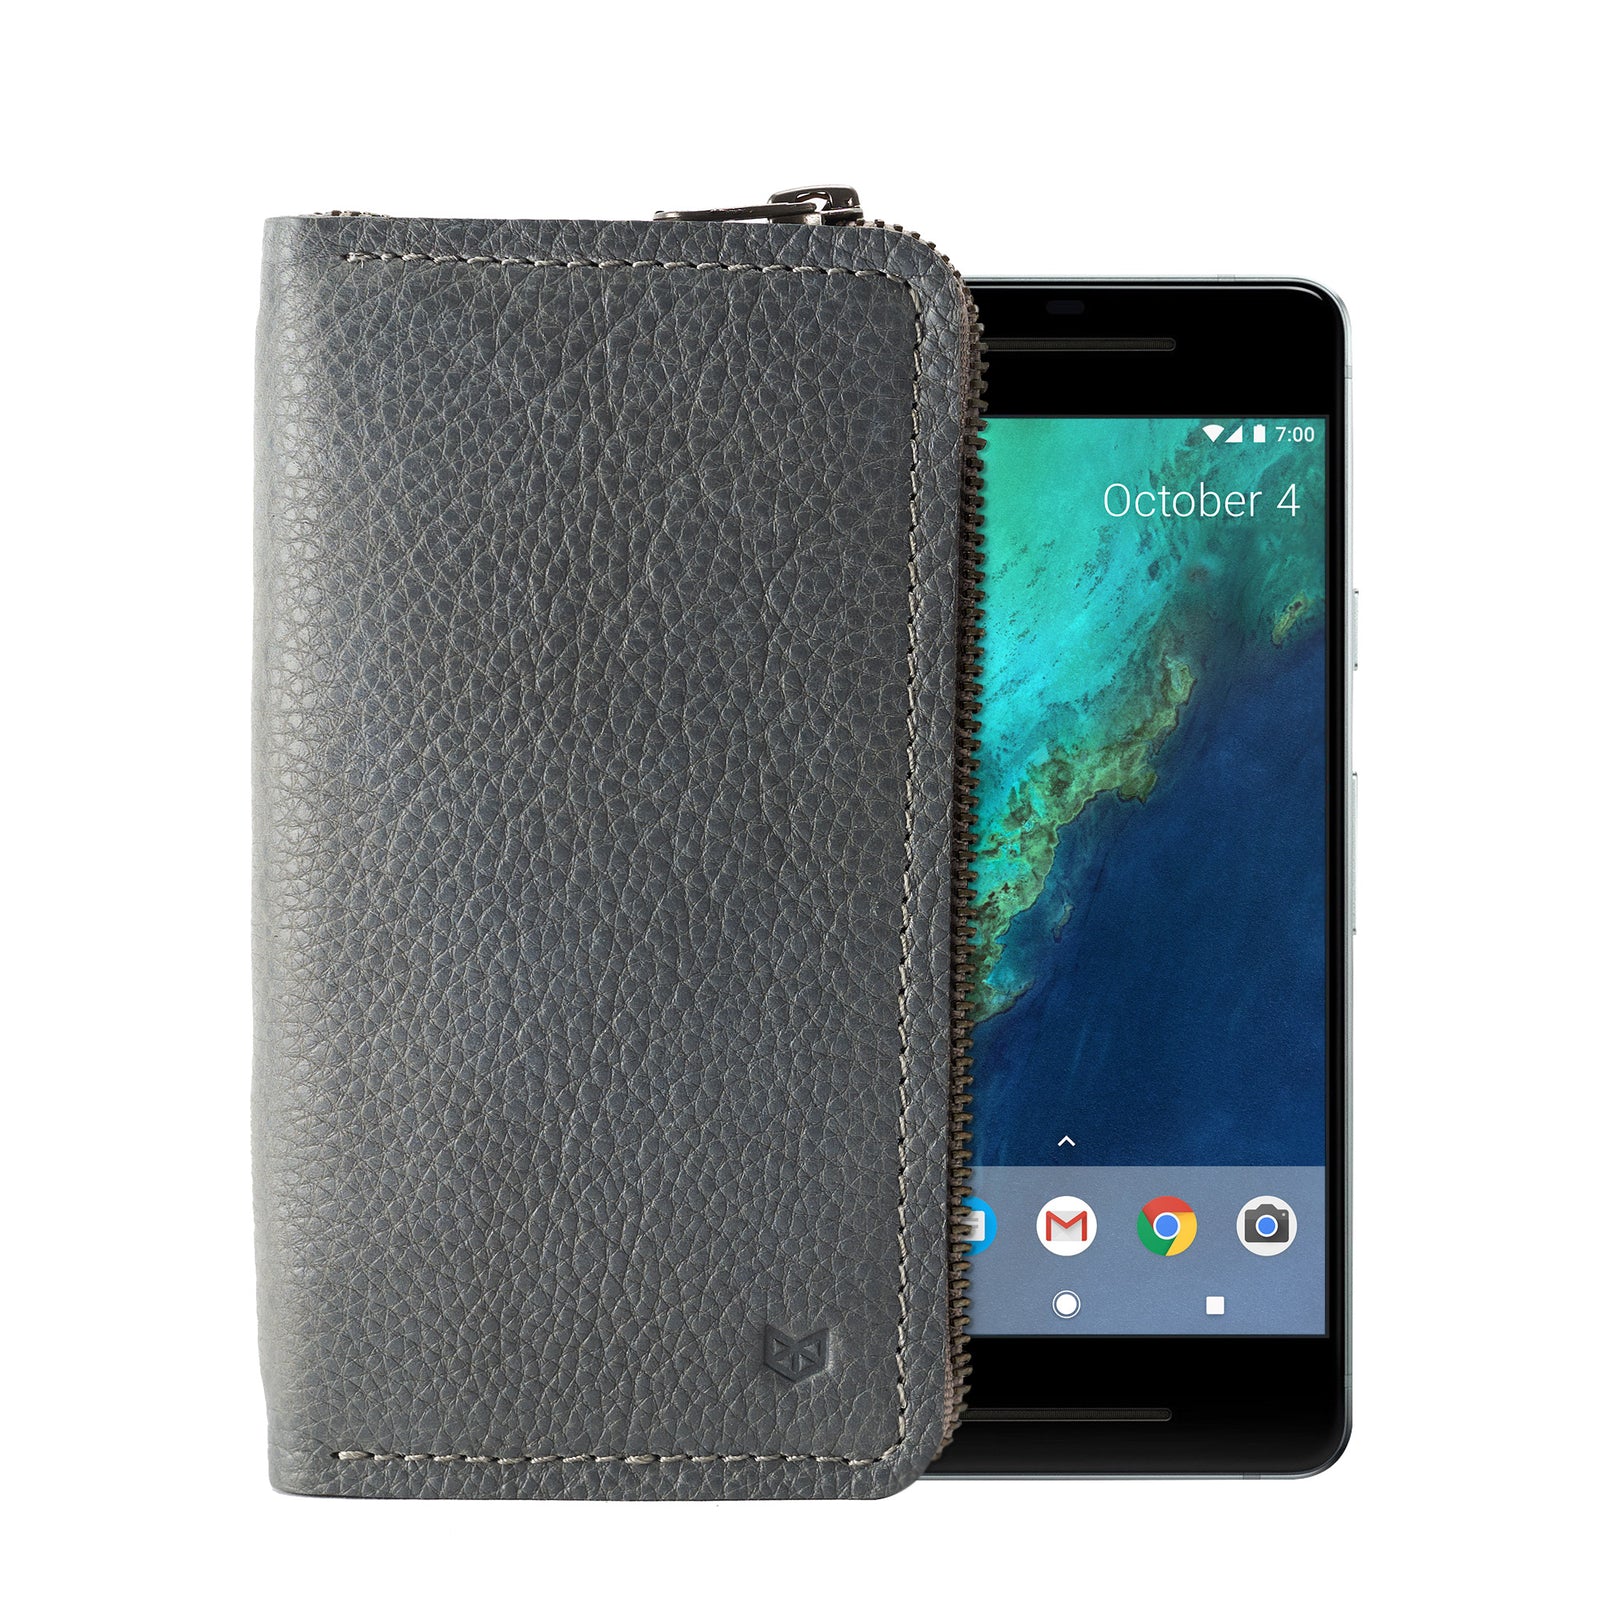 Grey Carefully handcrafted leather case stand wallet for new Google Pixel 2 and 2 XL. Men's Pixel sleeve with card holder